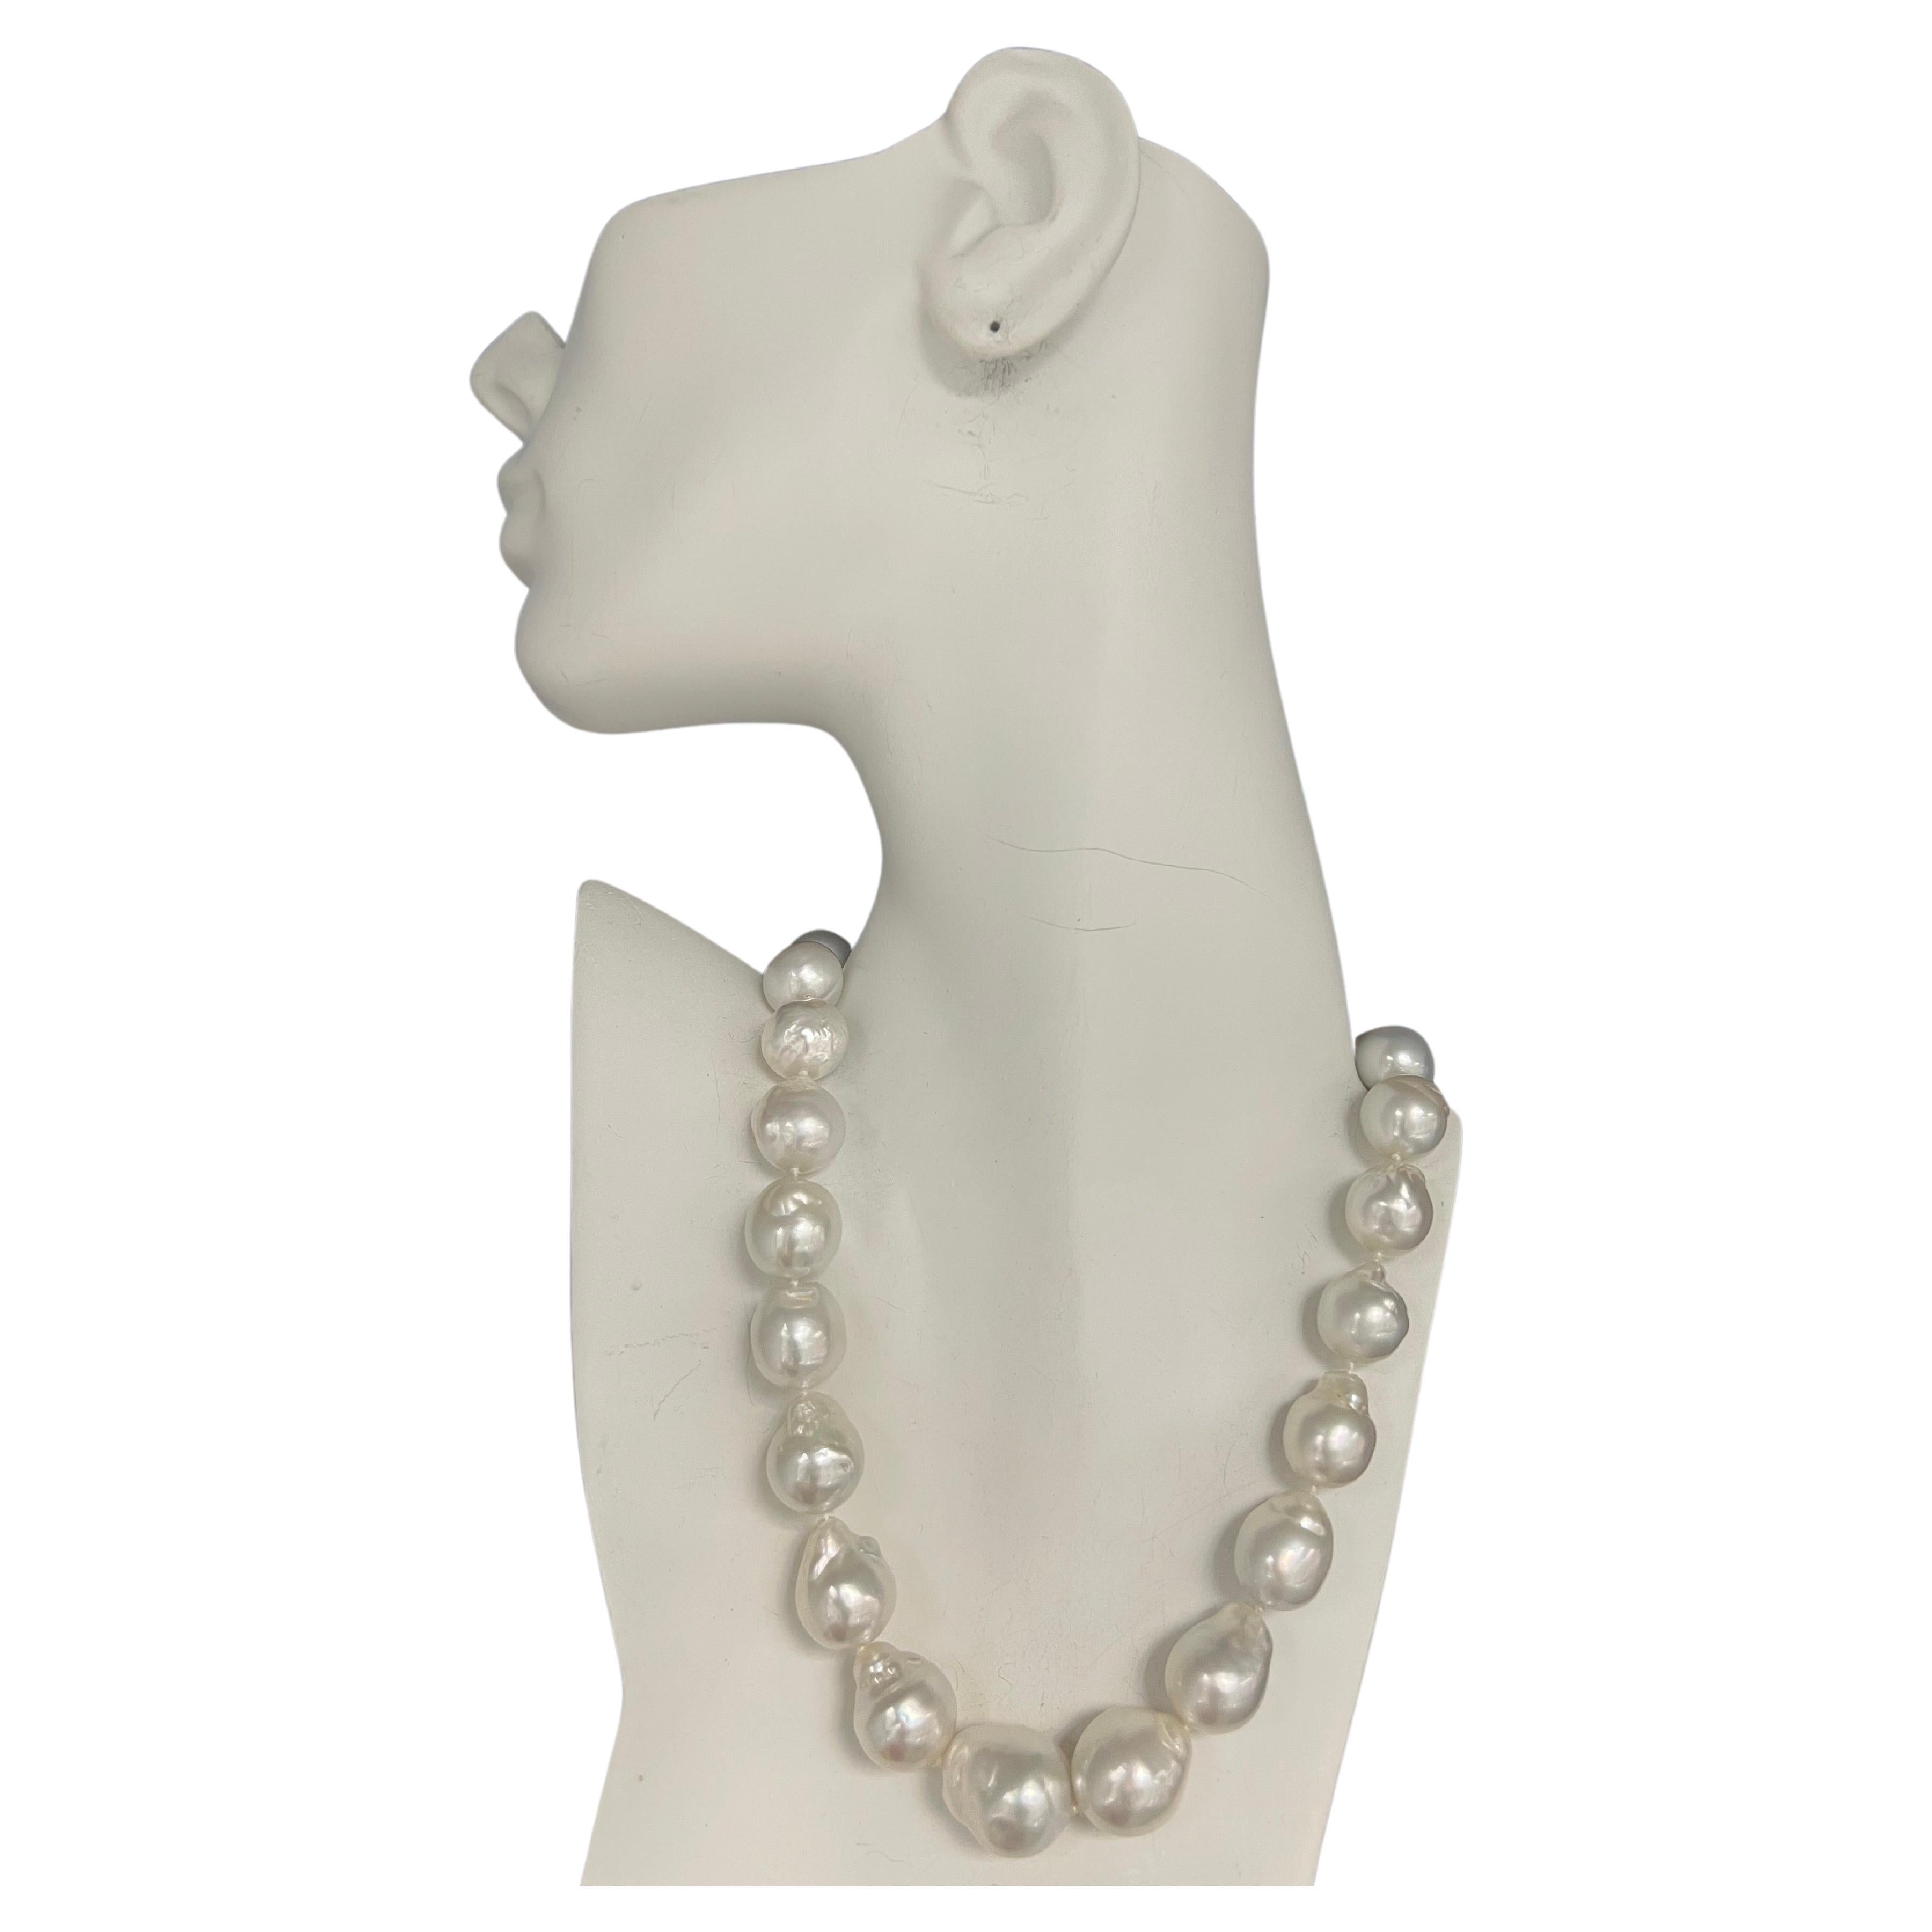 Signed JKa White Australian South Sea 14-17.5mm Cultured Baroque Pearl Necklace